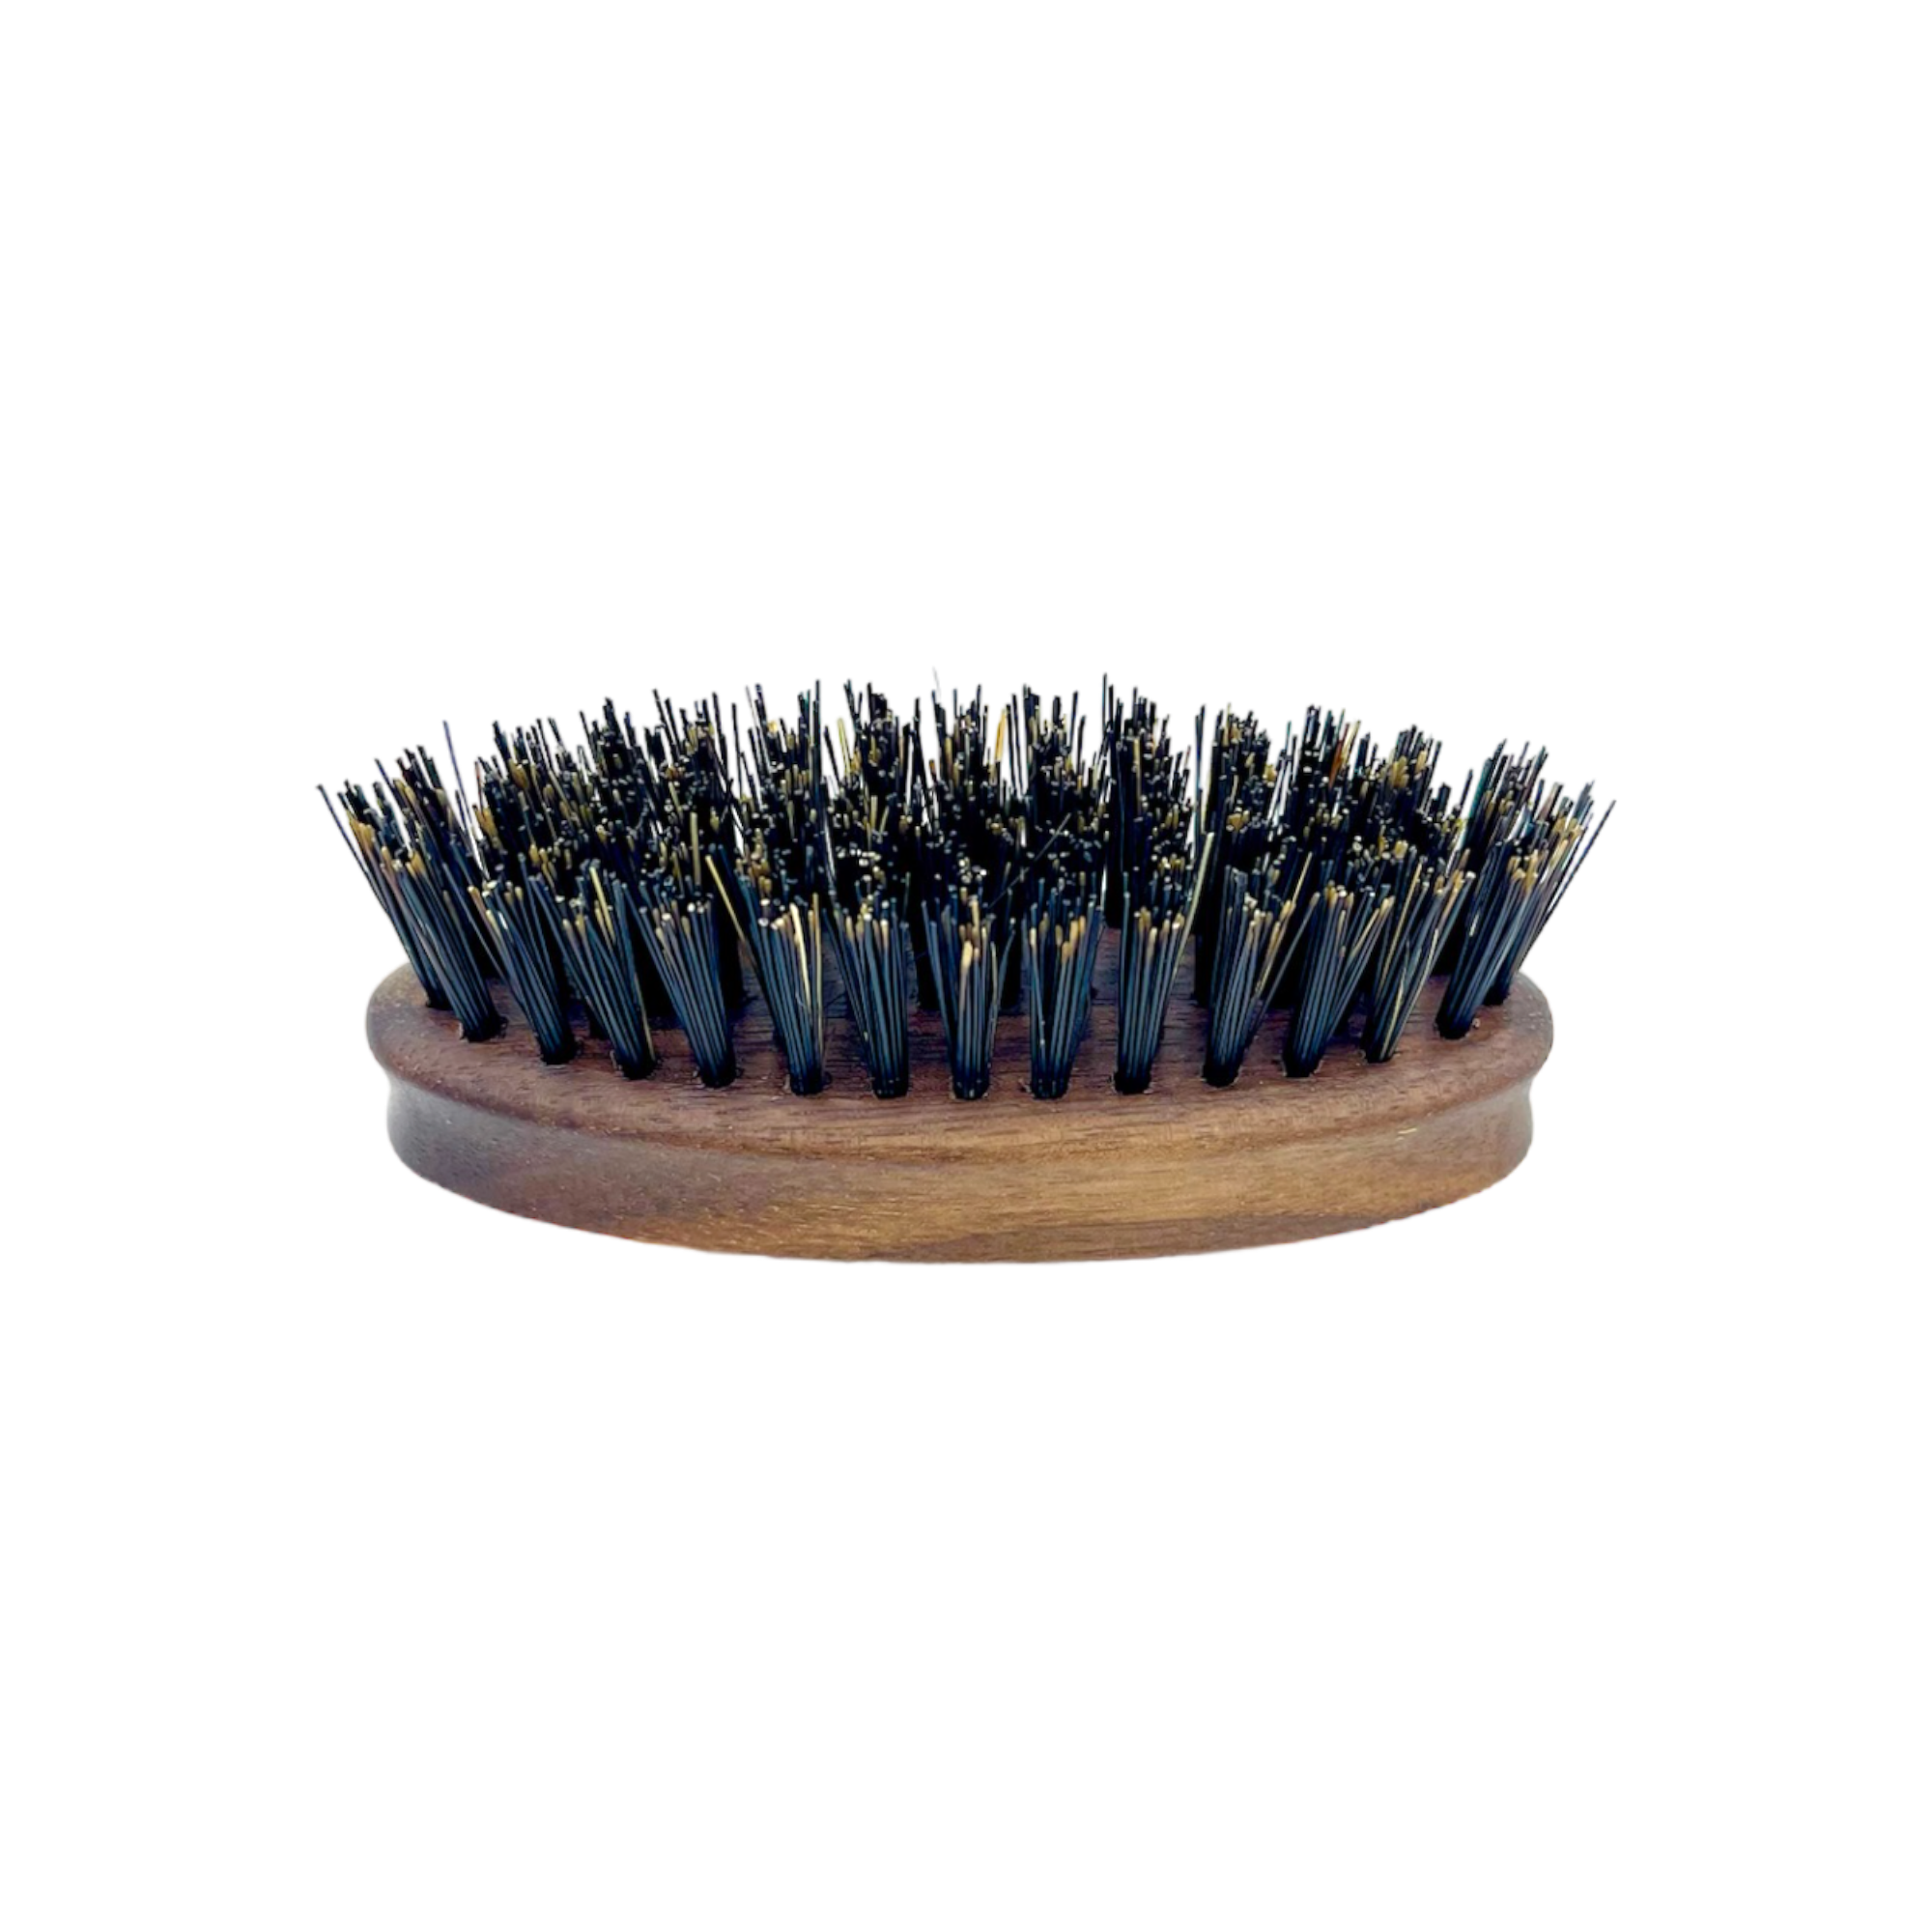 Dural nutwood beard brush with pure wild boar bristles